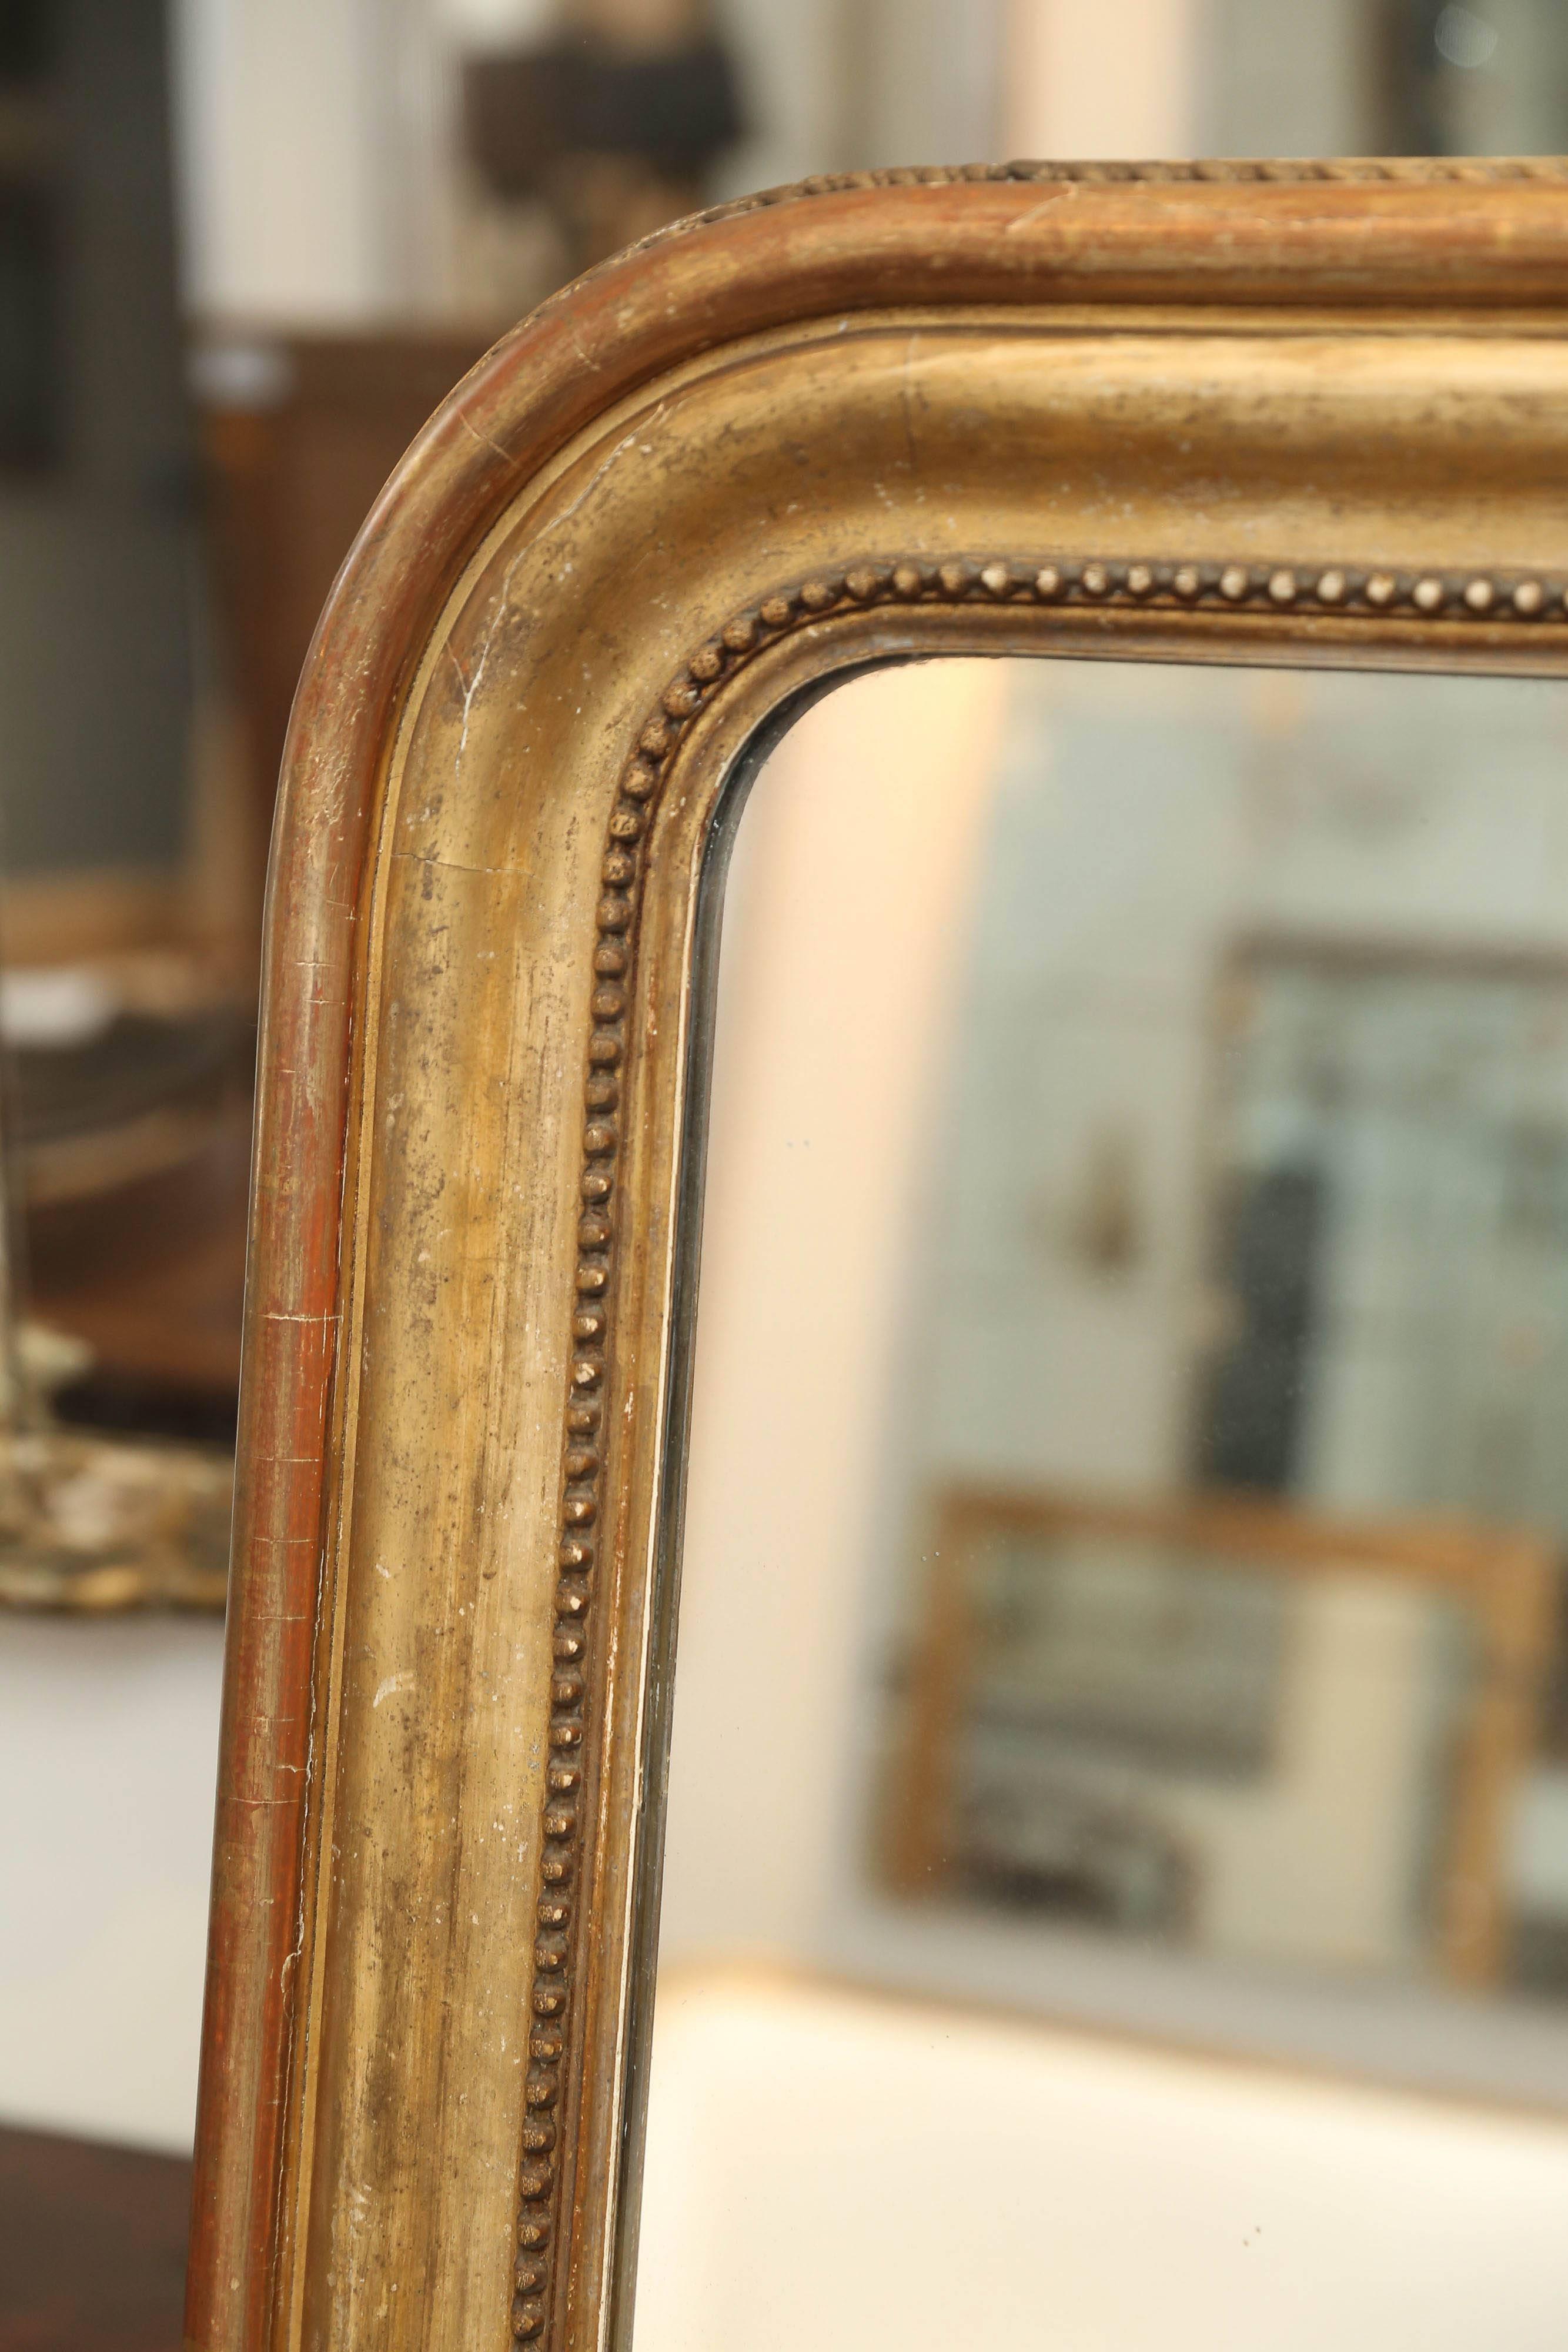 19th century Large Louis Philippe mirror with a 3/4 interior pearl detail and a frame with good wear on it.  Priced accordingly.